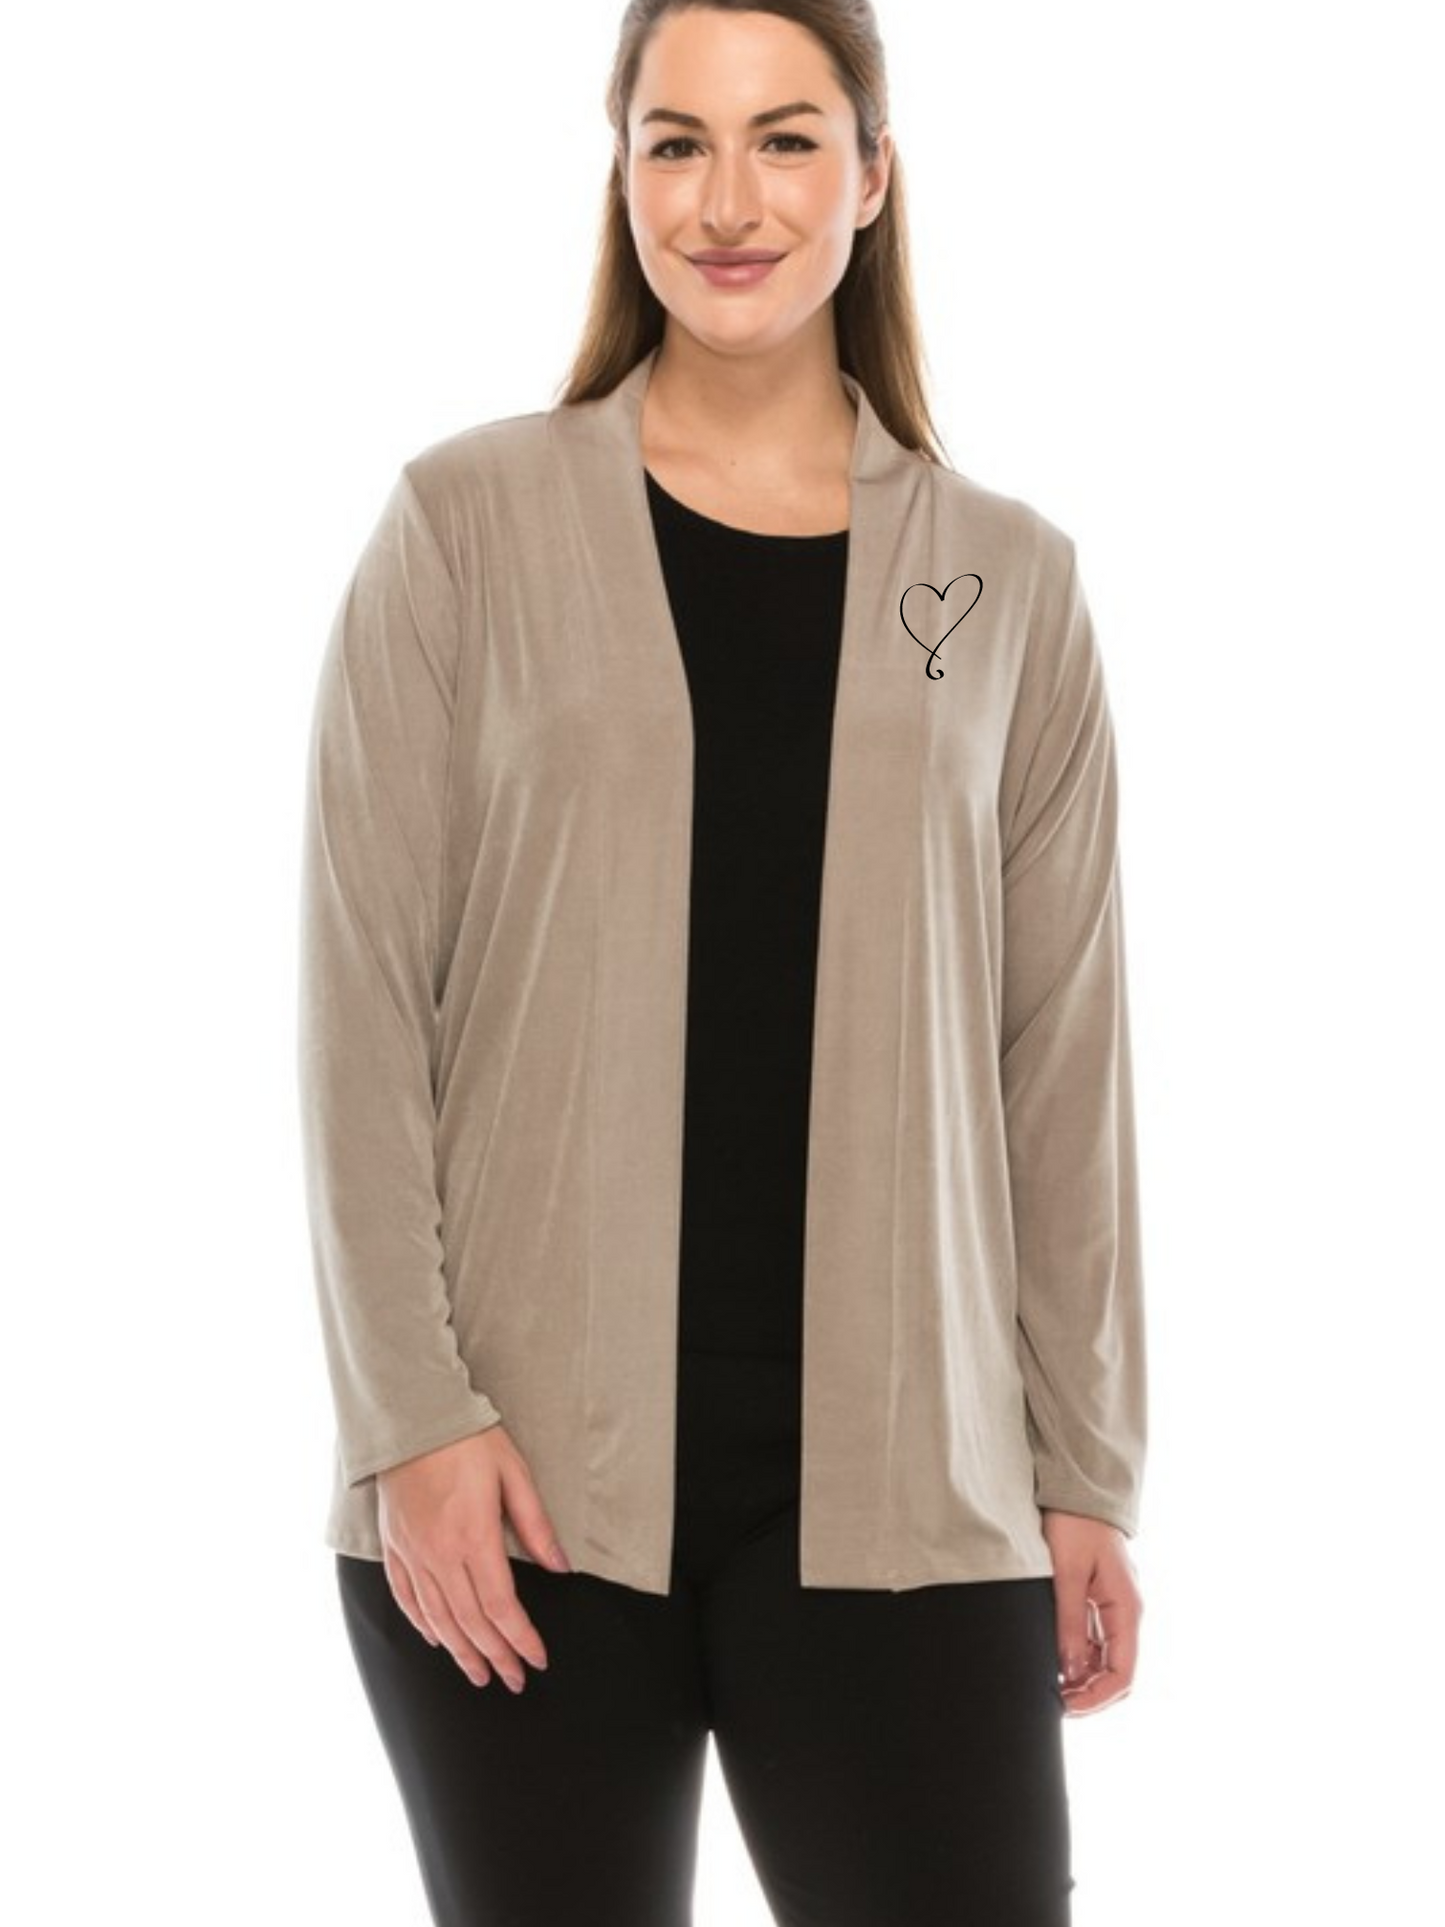 90% polyester / 10% spandex Classy looking long sleeve cardigan style jacket in the comfy soft category weighing heavy on your list of MUST HAVE ONE'S! Made in USA